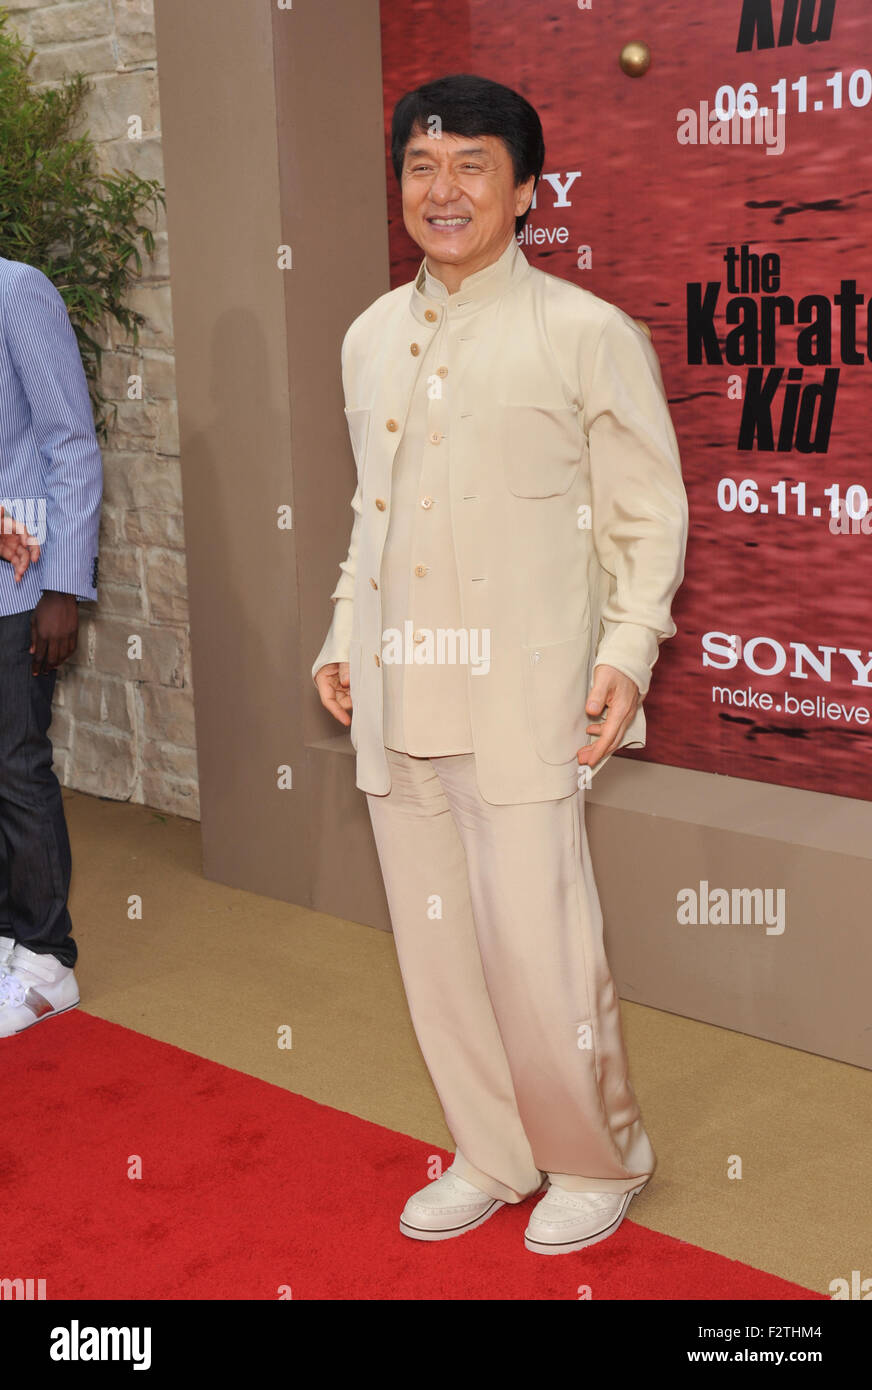 LOS ANGELES, CA - JUNE 6, 2010: Jackie Chan at the Los Angeles premiere of his new movie 'The Karate Kid' at Mann Village Theatre, Westwood. Stock Photo